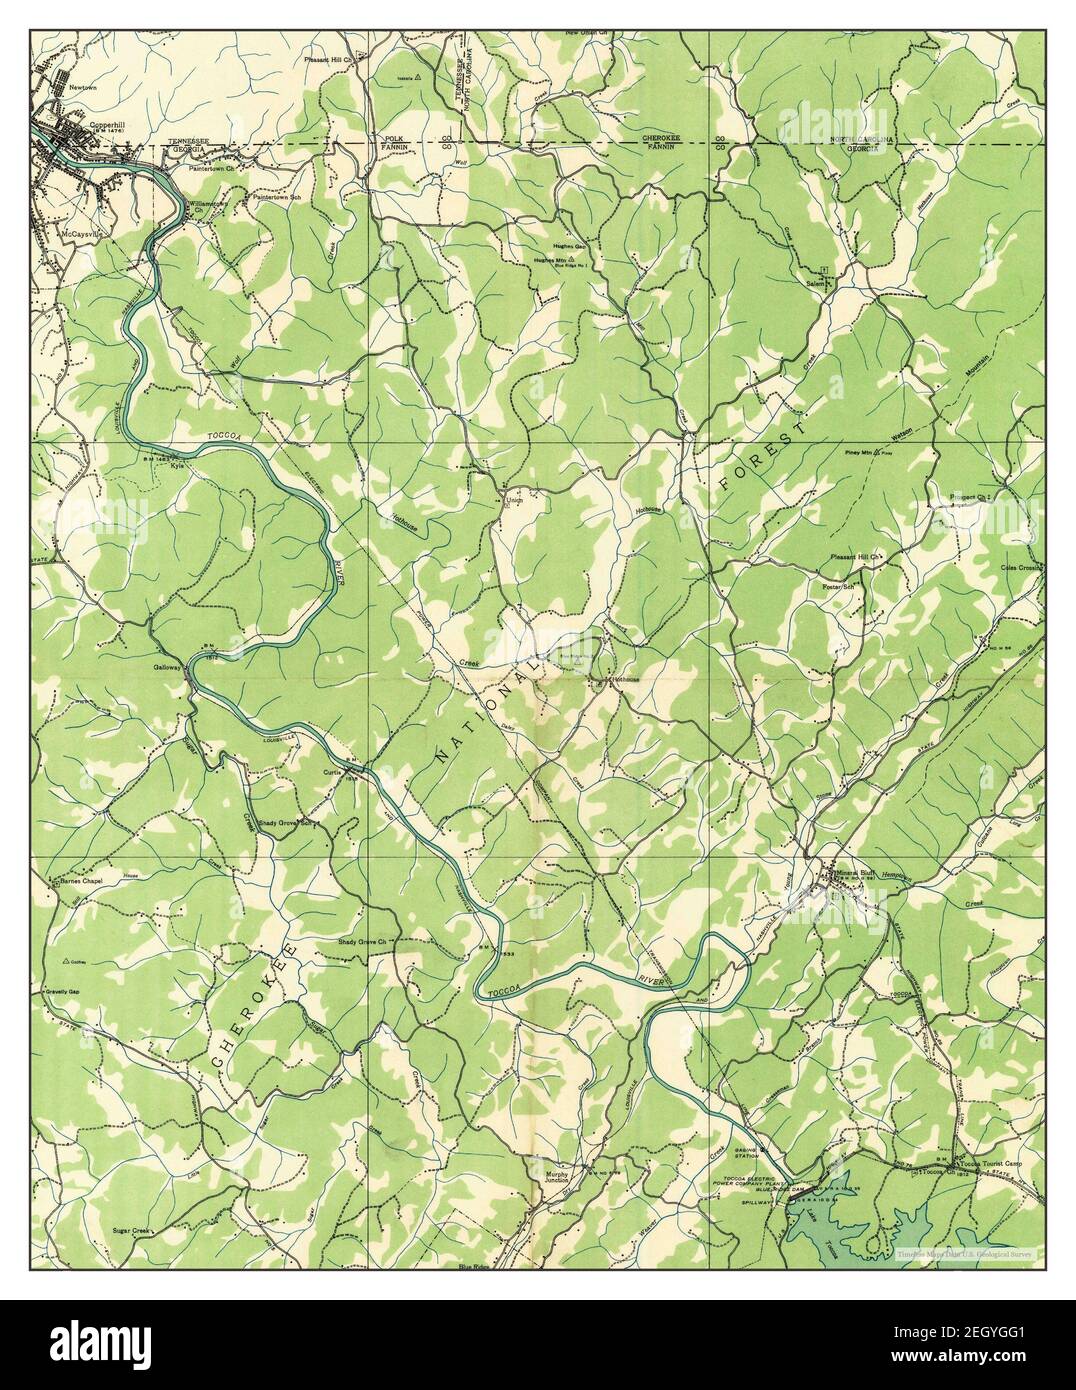 Mineral Bluff, Georgia, map 1935, 1:24000, United States of America by Timeless Maps, data U.S. Geological Survey Foto Stock